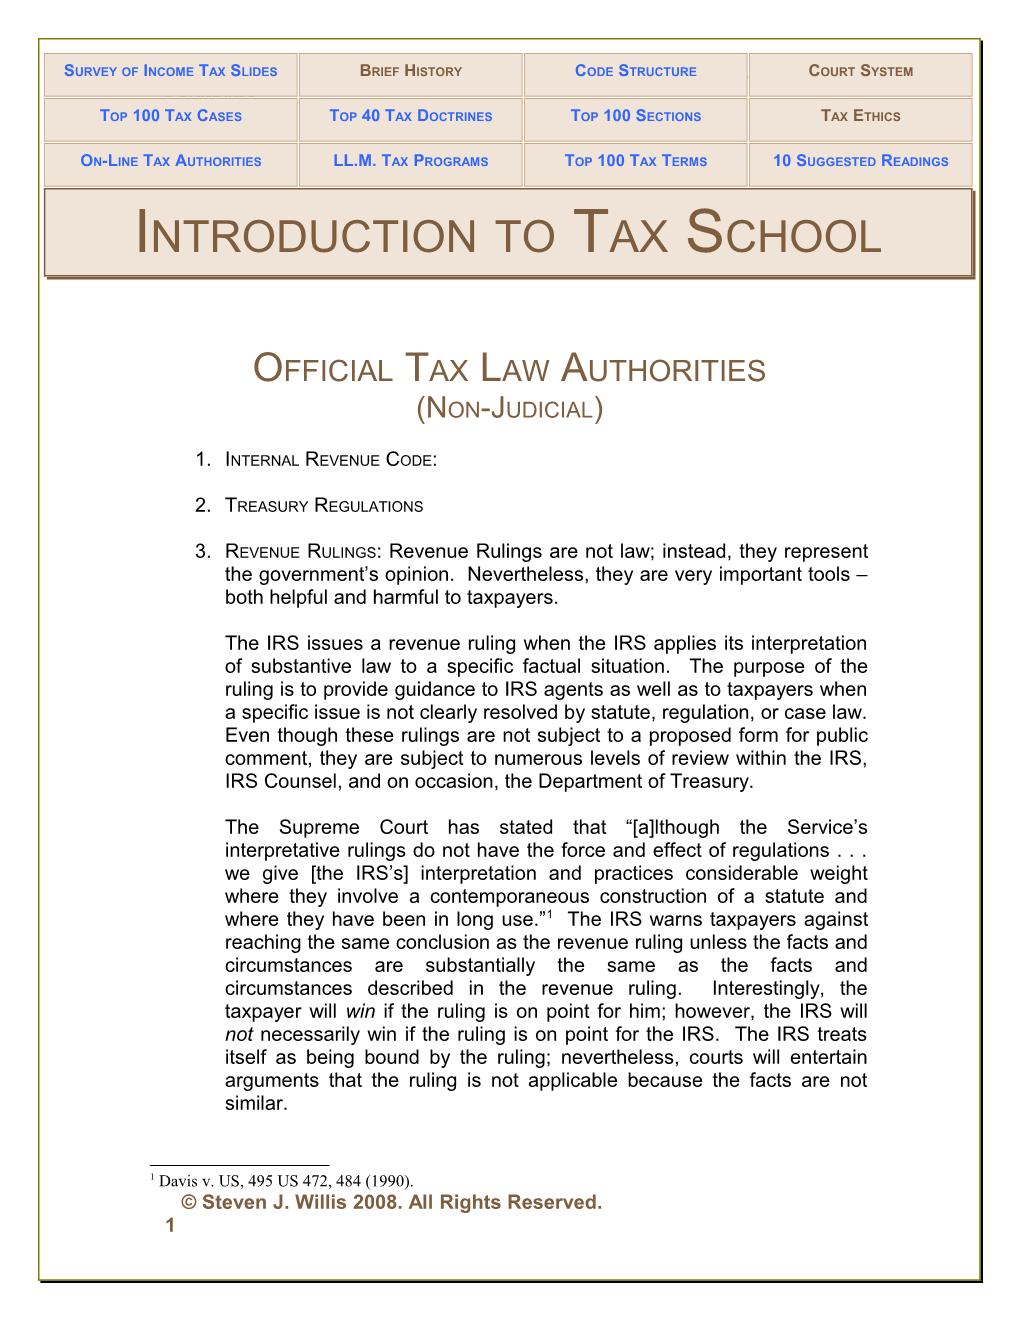 Introduction to Tax School LL.M. (Taxation) Programs